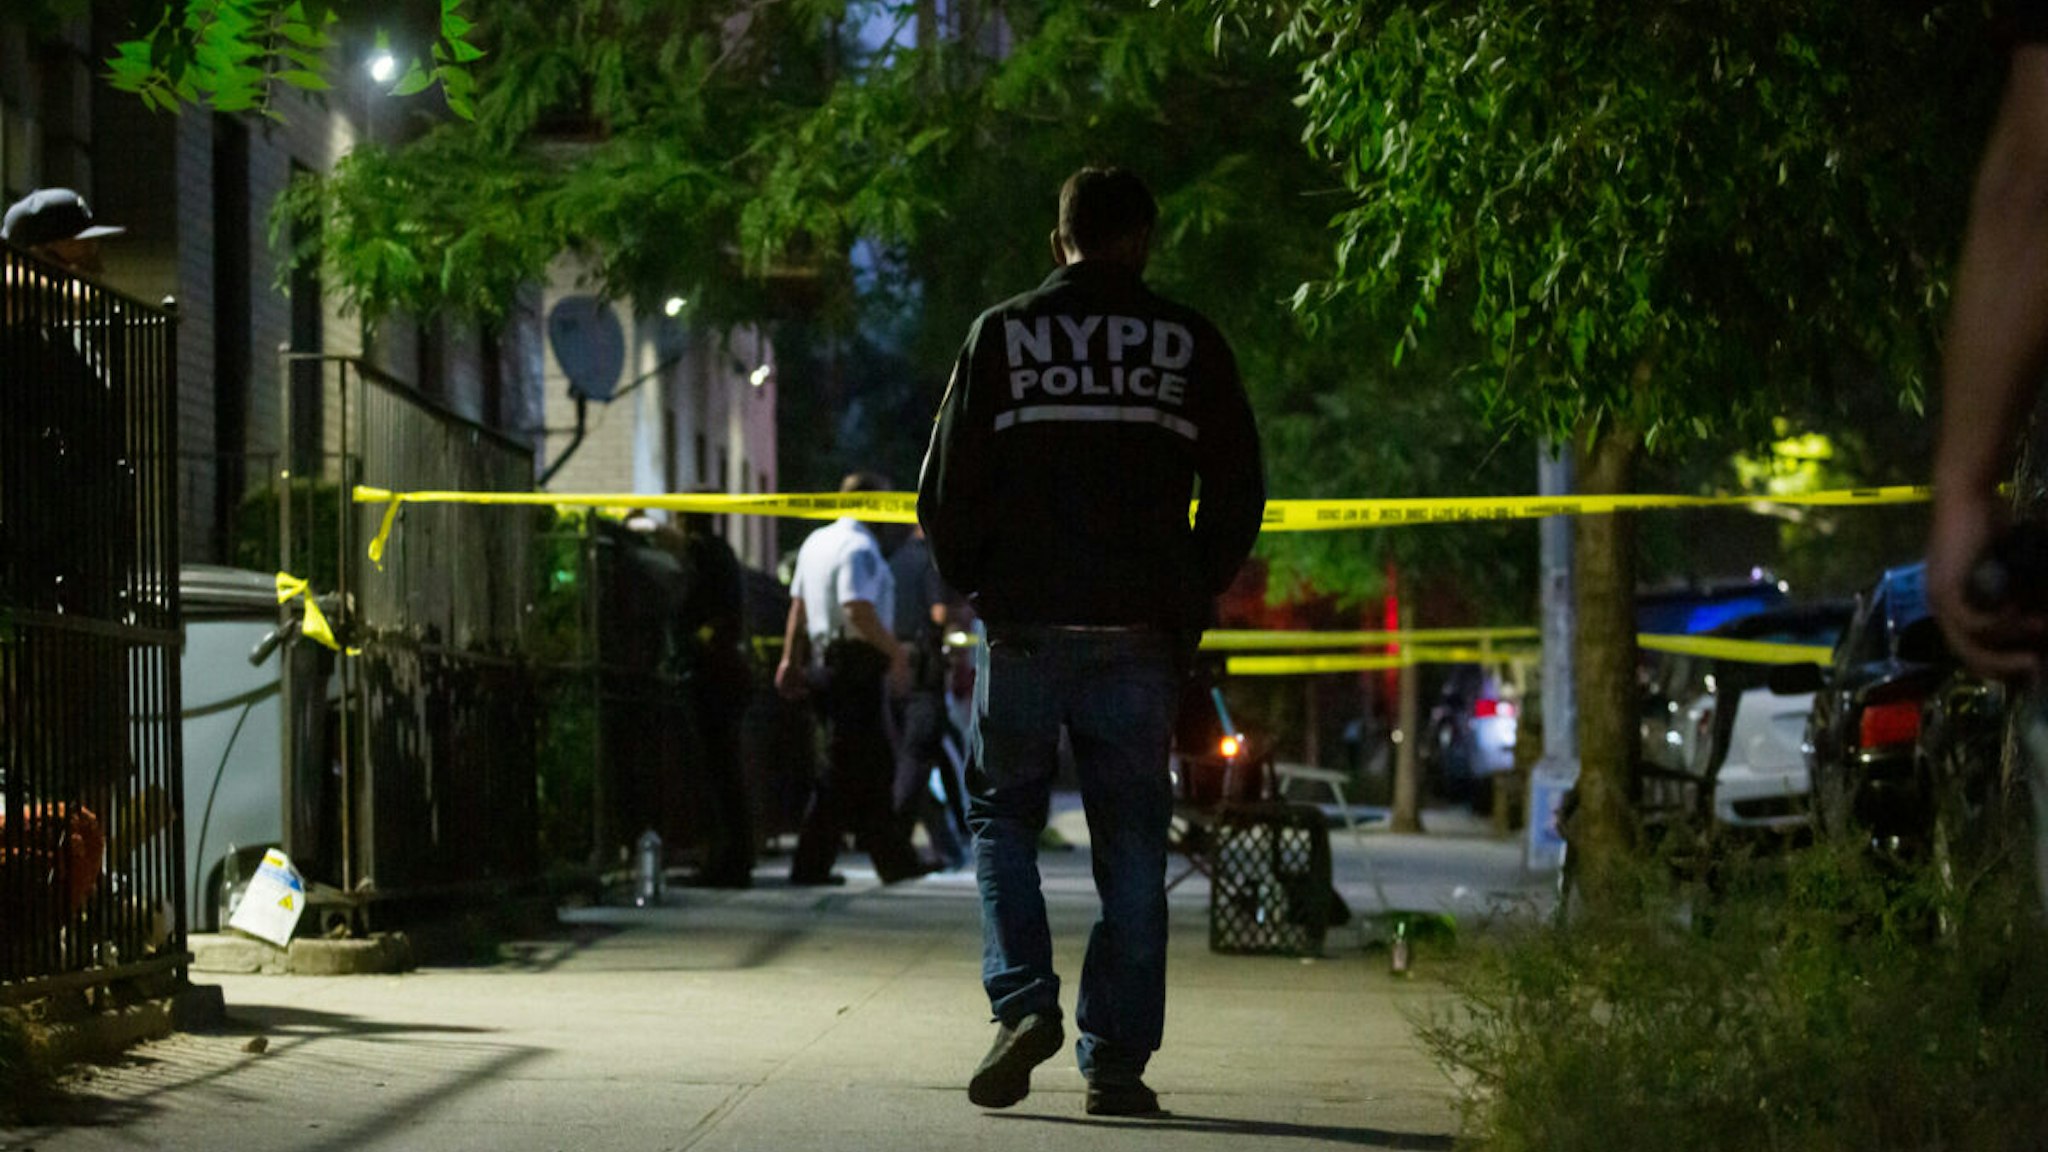 New York Police Department (NYPD) officers investigate the scene of a shooting in the Crown Heights neighborhood in the Brooklyn borough of New York, U.S., on Thursday, July 21, 2022.